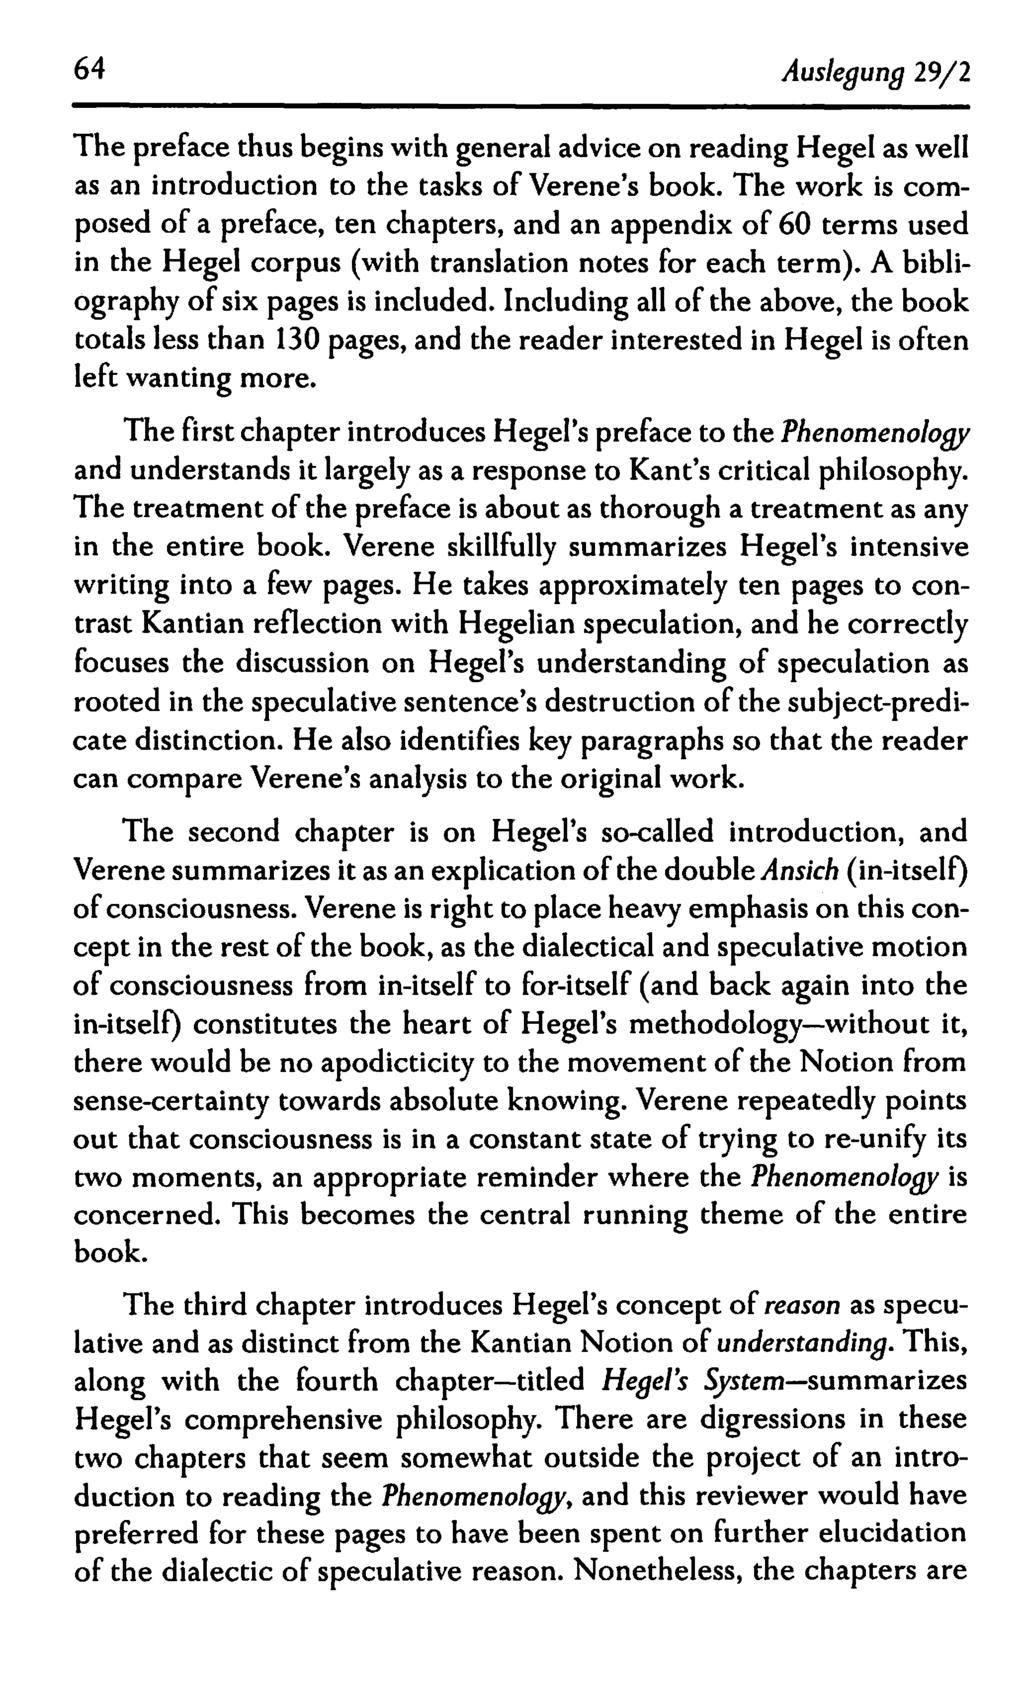 64 Auslegung 29/2 The preface thus begins with general advice on reading Hegel as well as an introduction to the tasks of Verene's book.